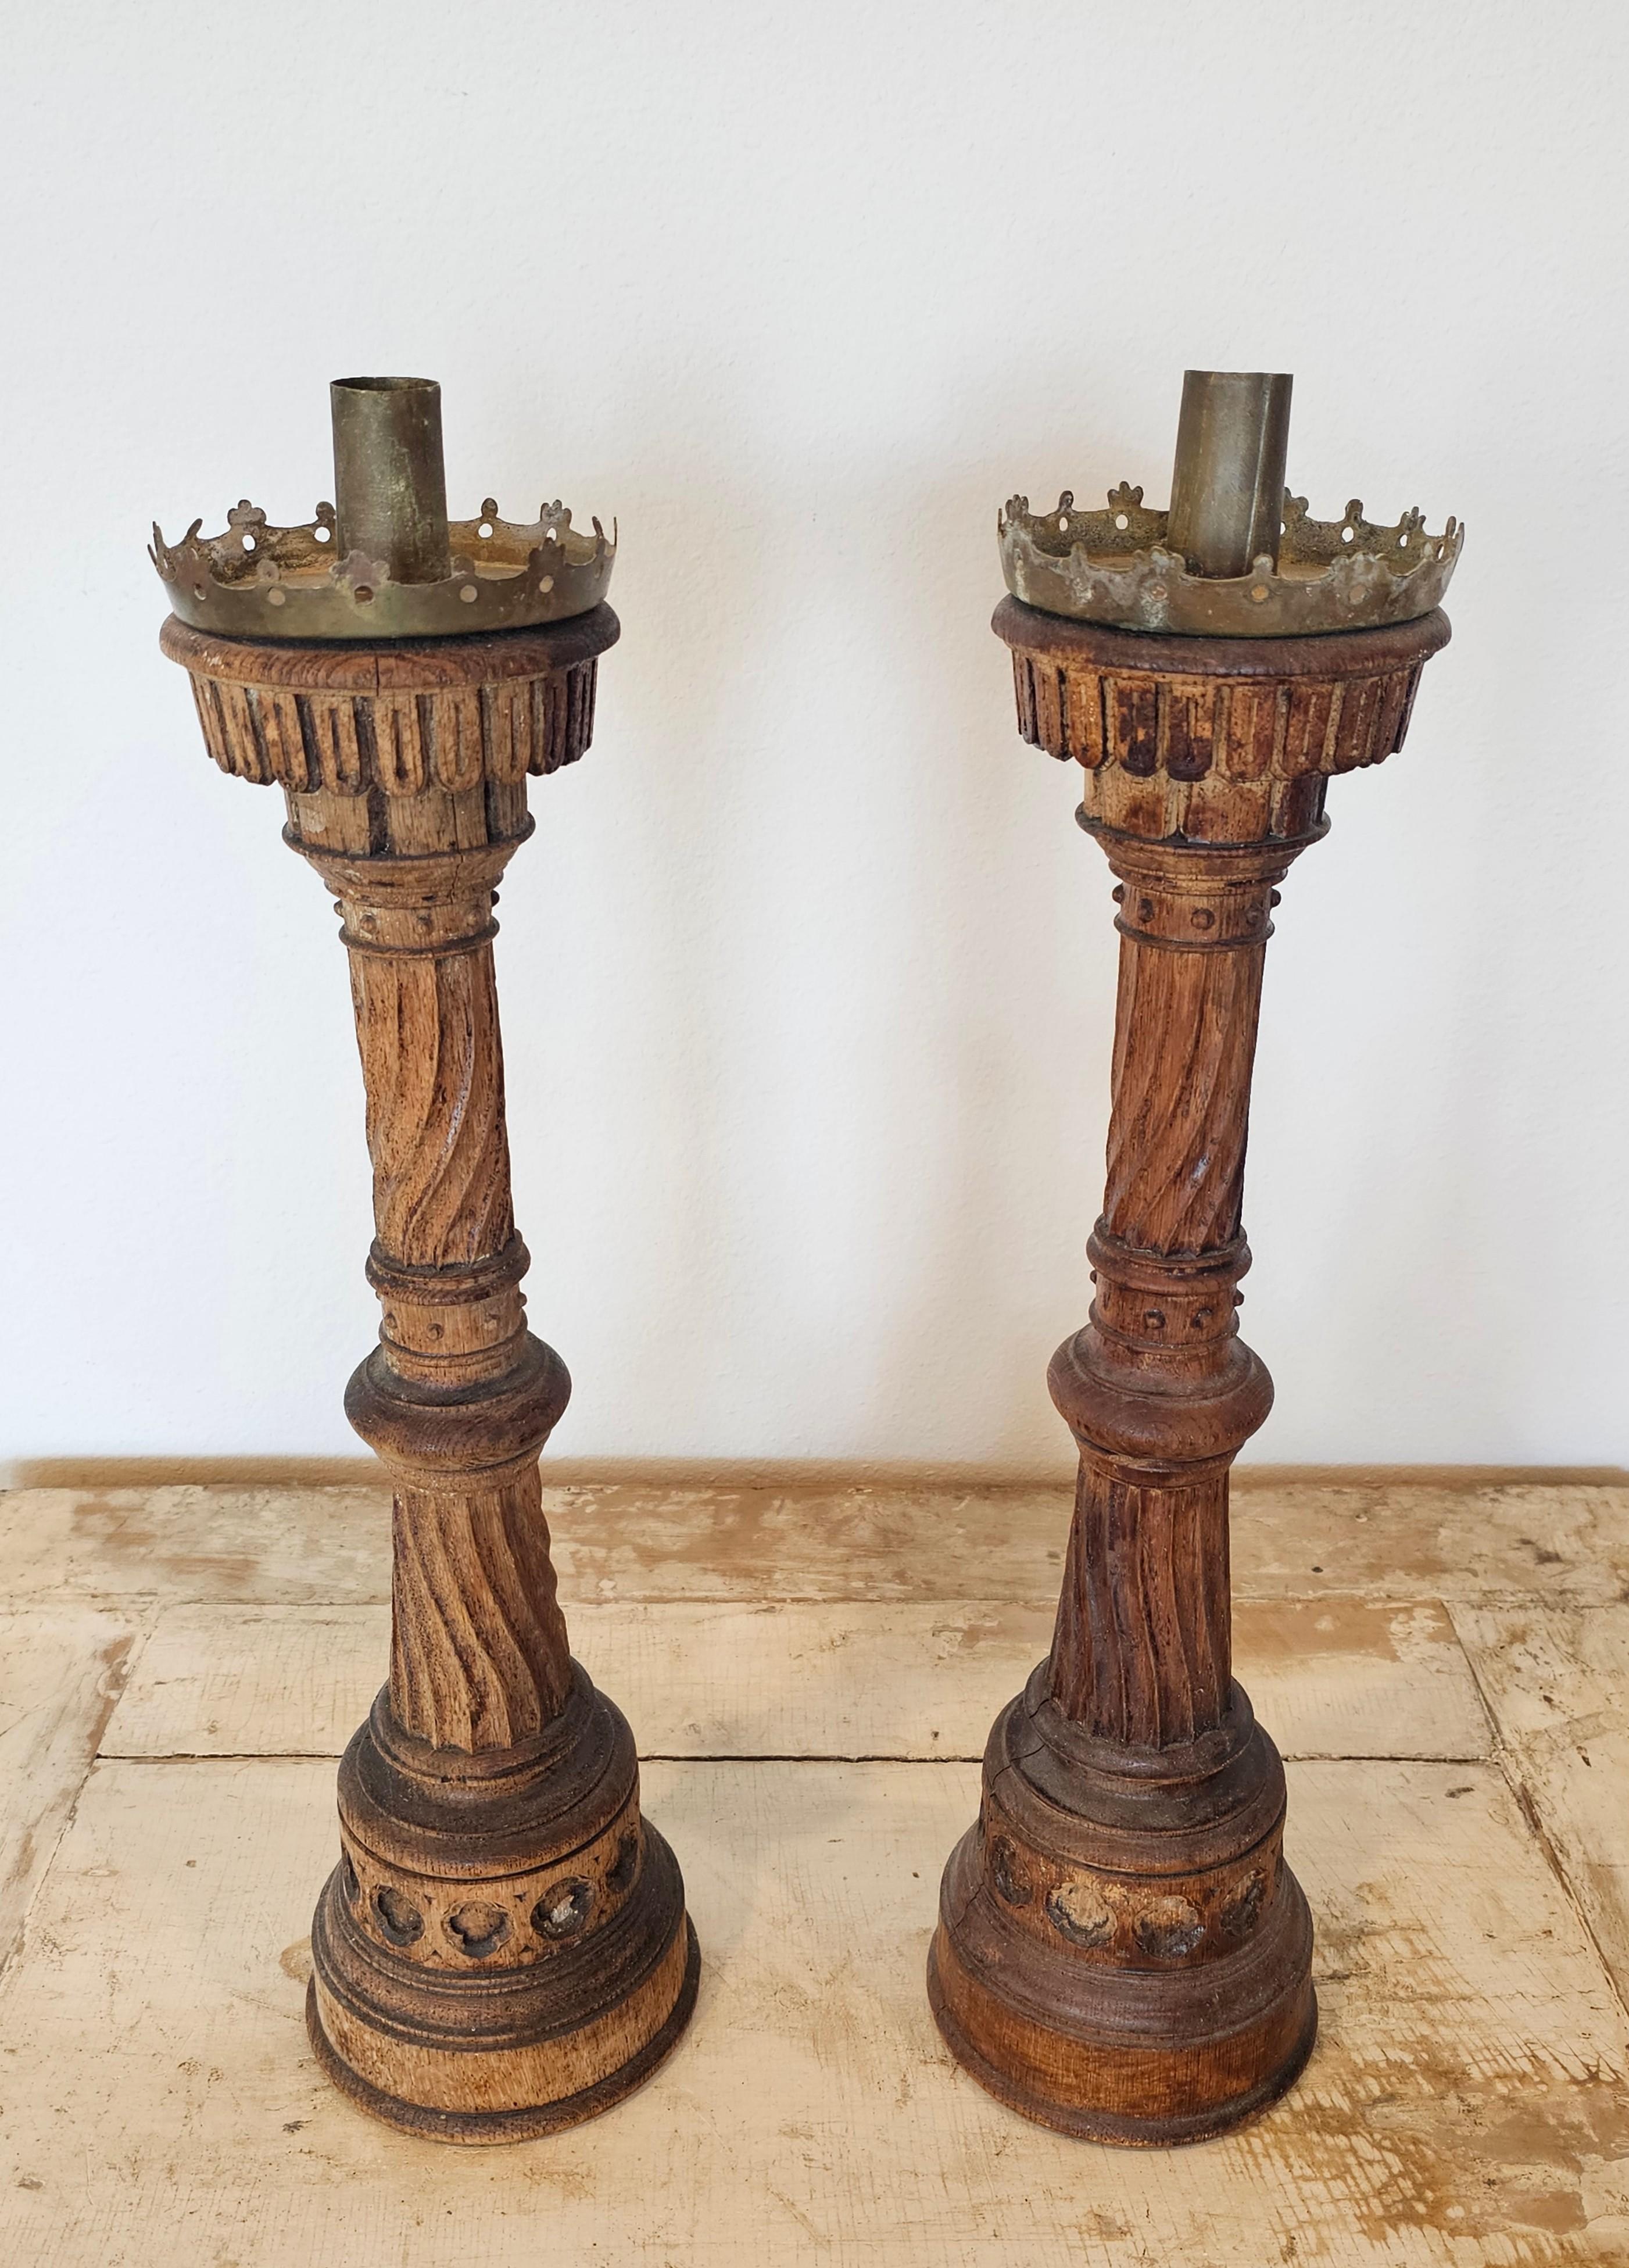 Gothic Revival 19th Century French Neo-Gothic Carved Wood Church Altar Stick Candlestick Pair 